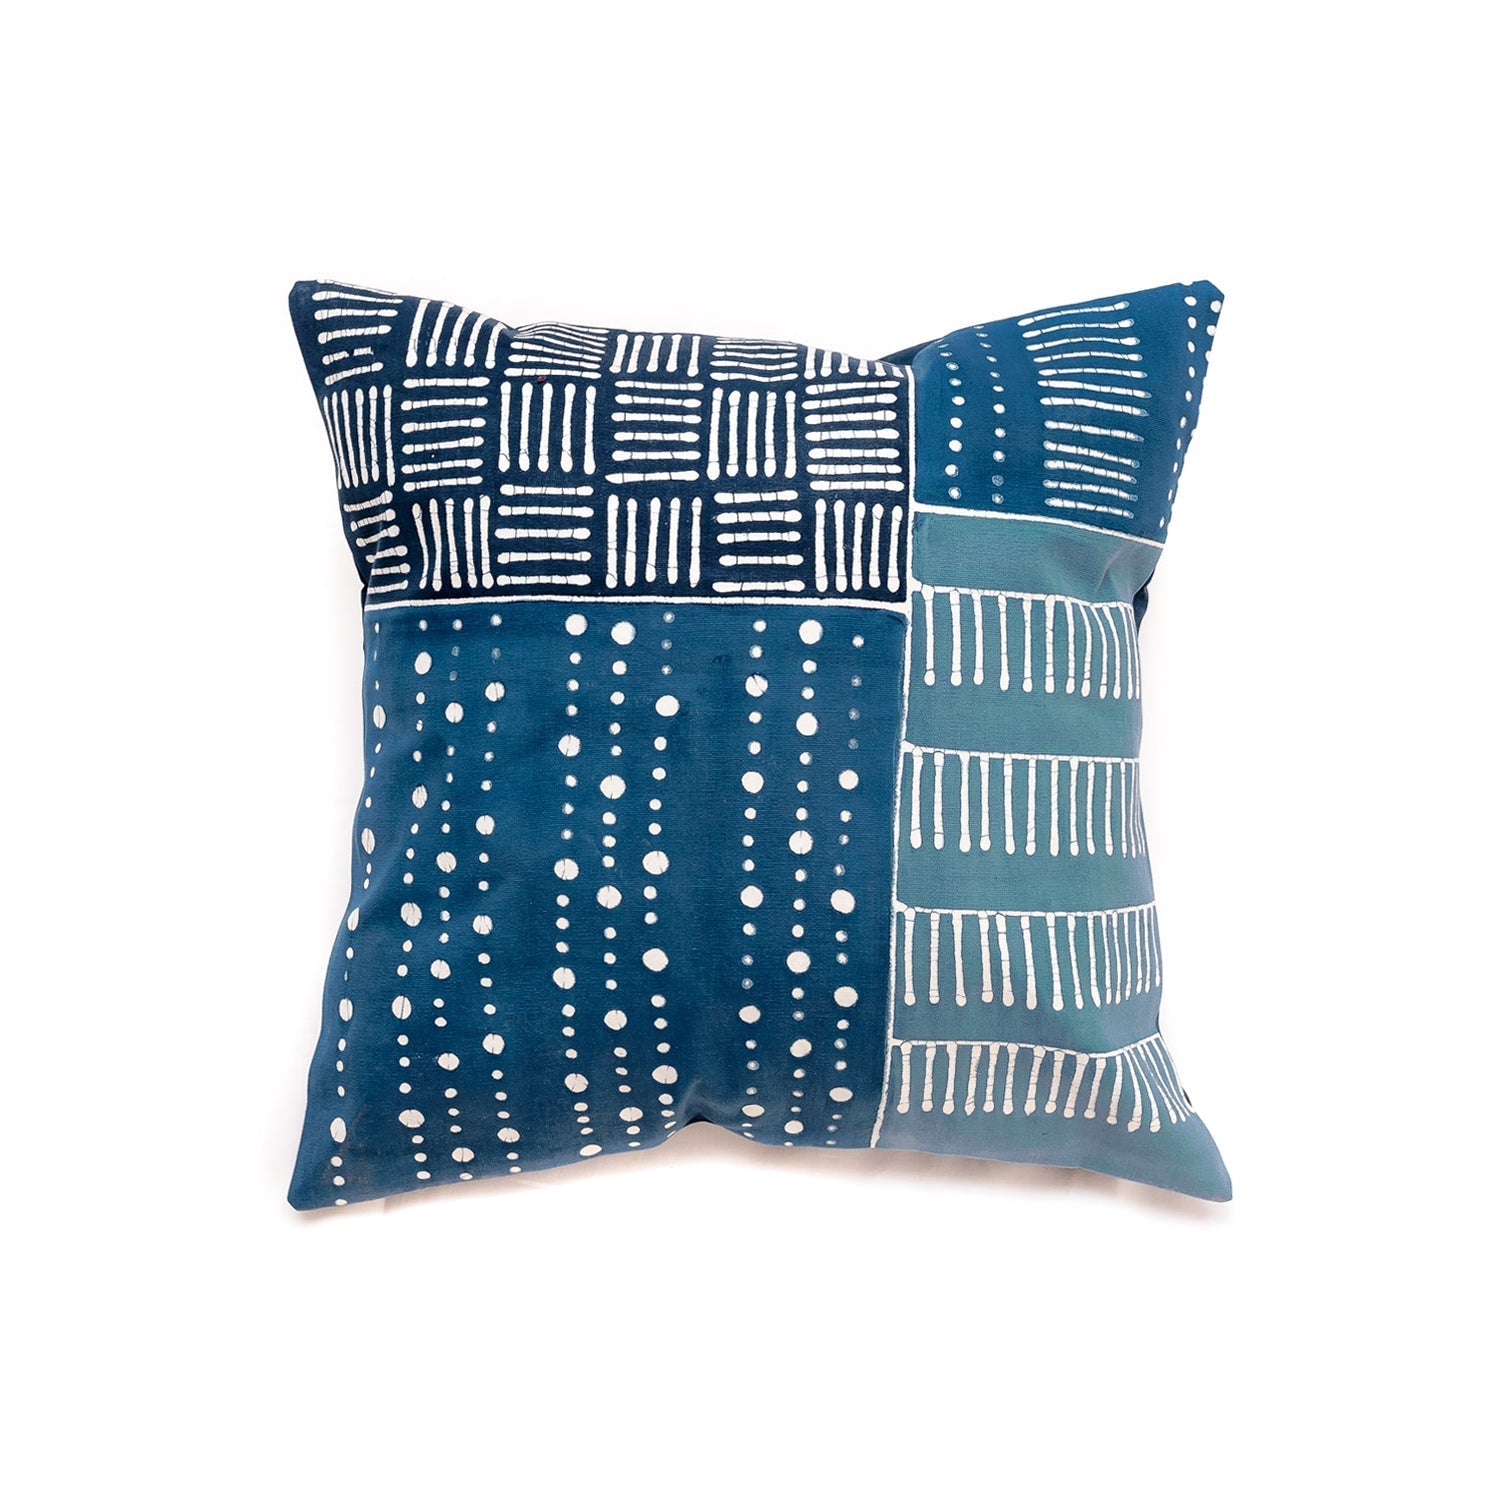 Handcrafted Tribal Cloth Indigo Patchwork Dark cushion cover in blues, showcasing a blend of tribal patterns.